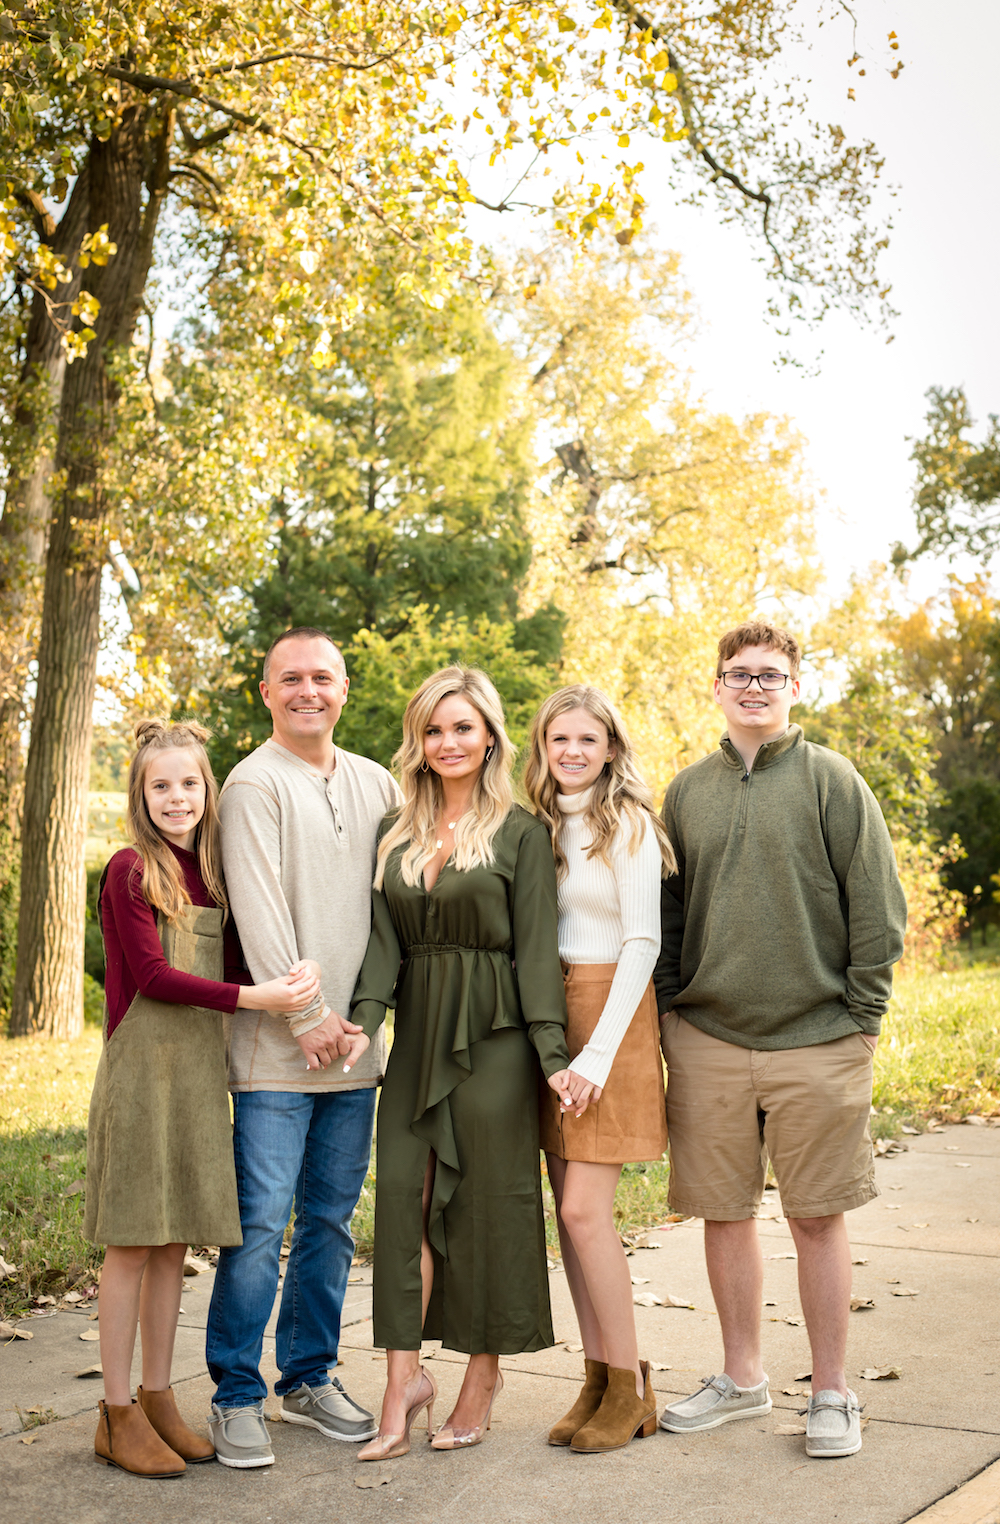 Tips For Choosing Outfits For Family Photos.